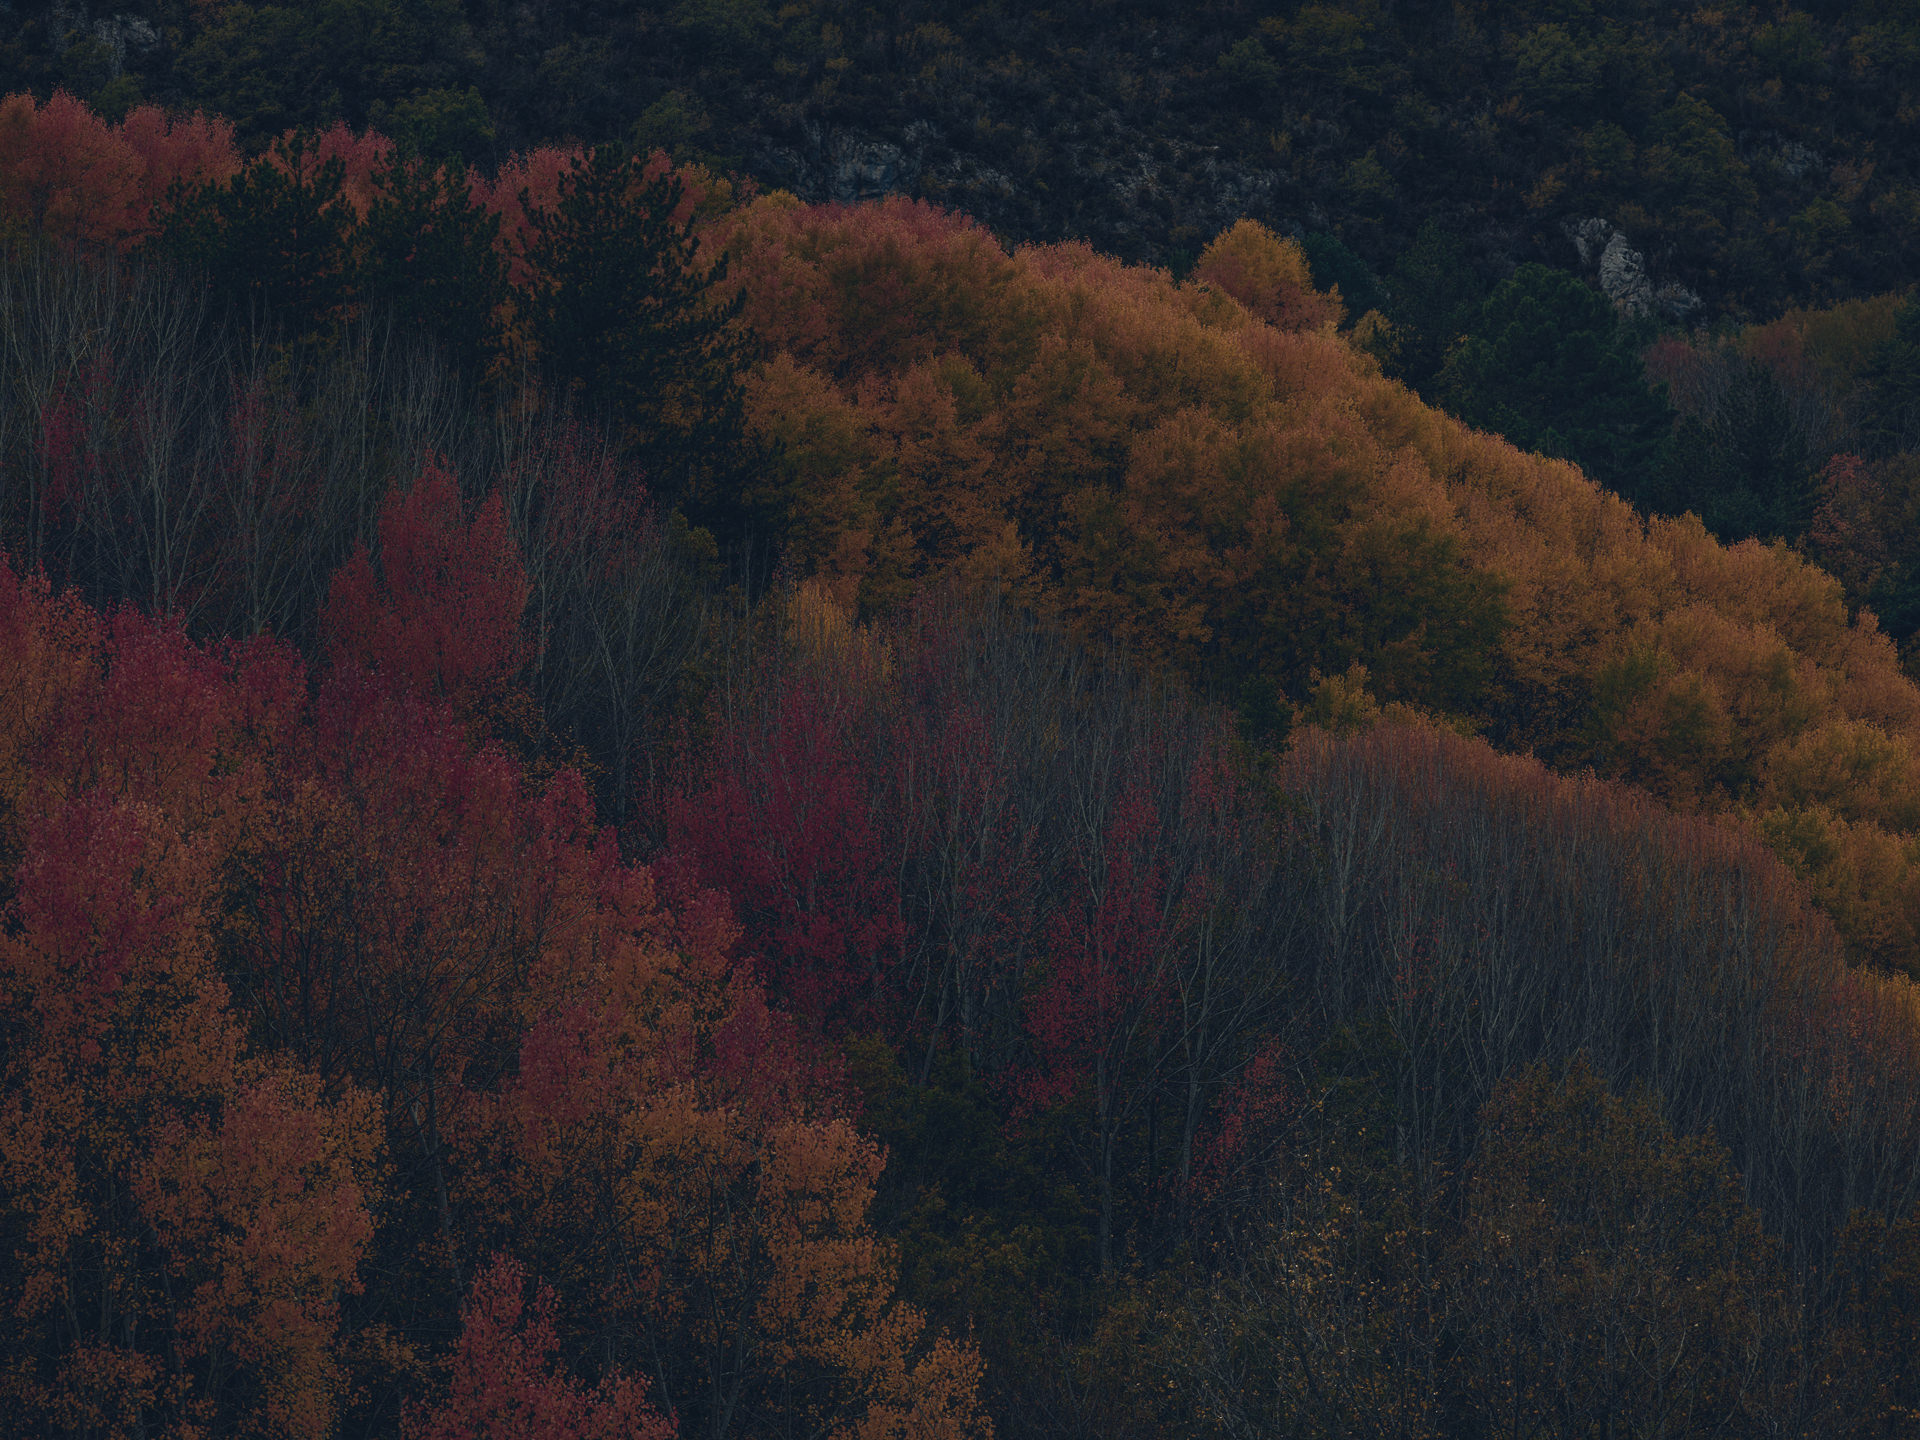 pyrenees, landscape, france, spain, anke luckmann, mountains, www.ankeluckmann.com, trees, colorful, leaves, red